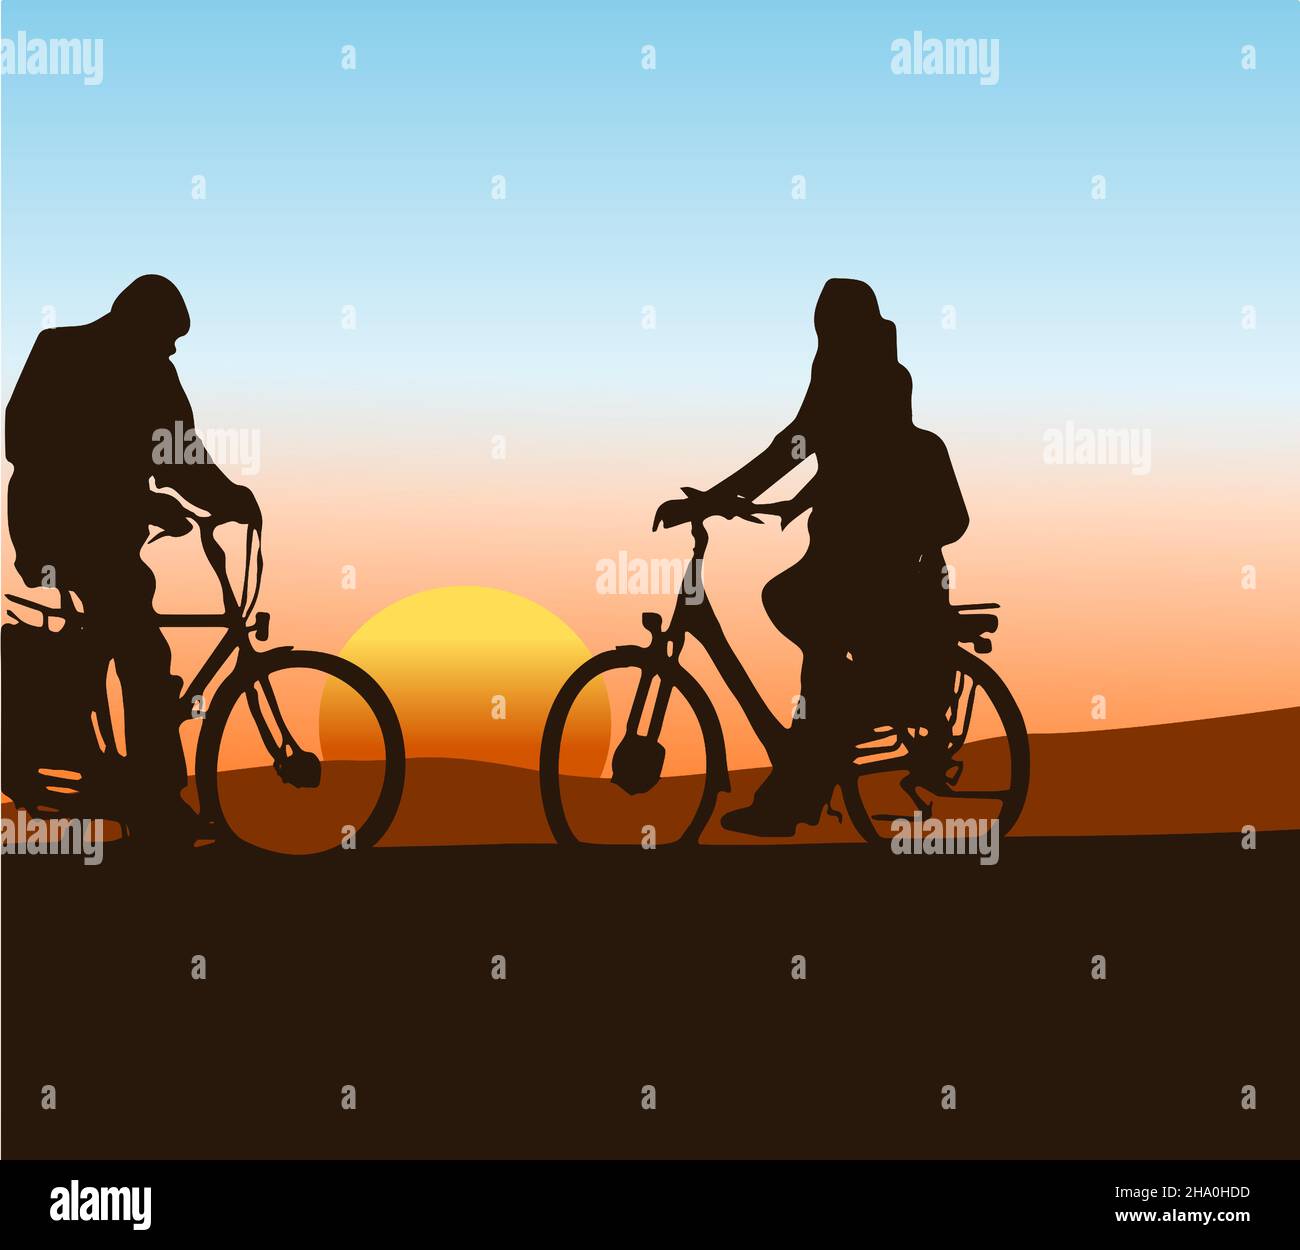 silhouette of two cyclists with a sunset in the background Stock Vector